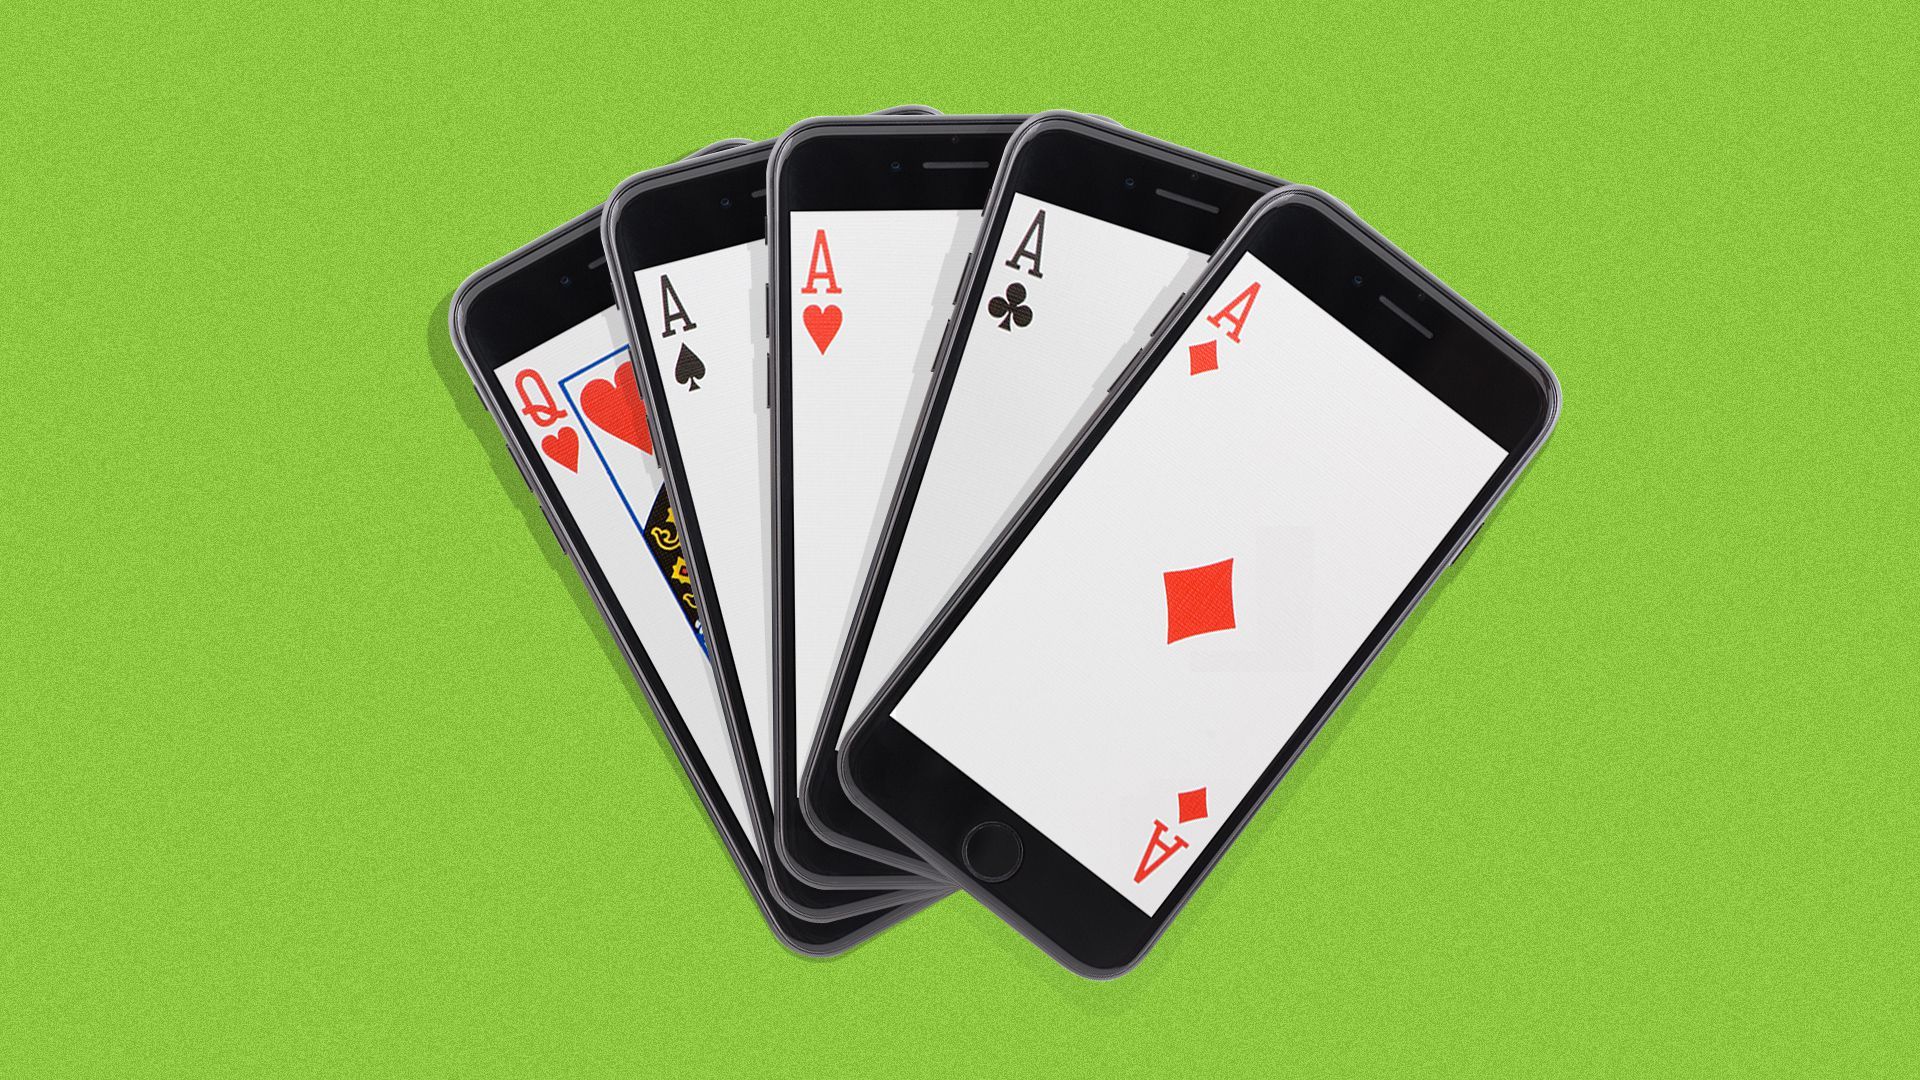 Illustration of a hand of high cards in five separate mobile phones